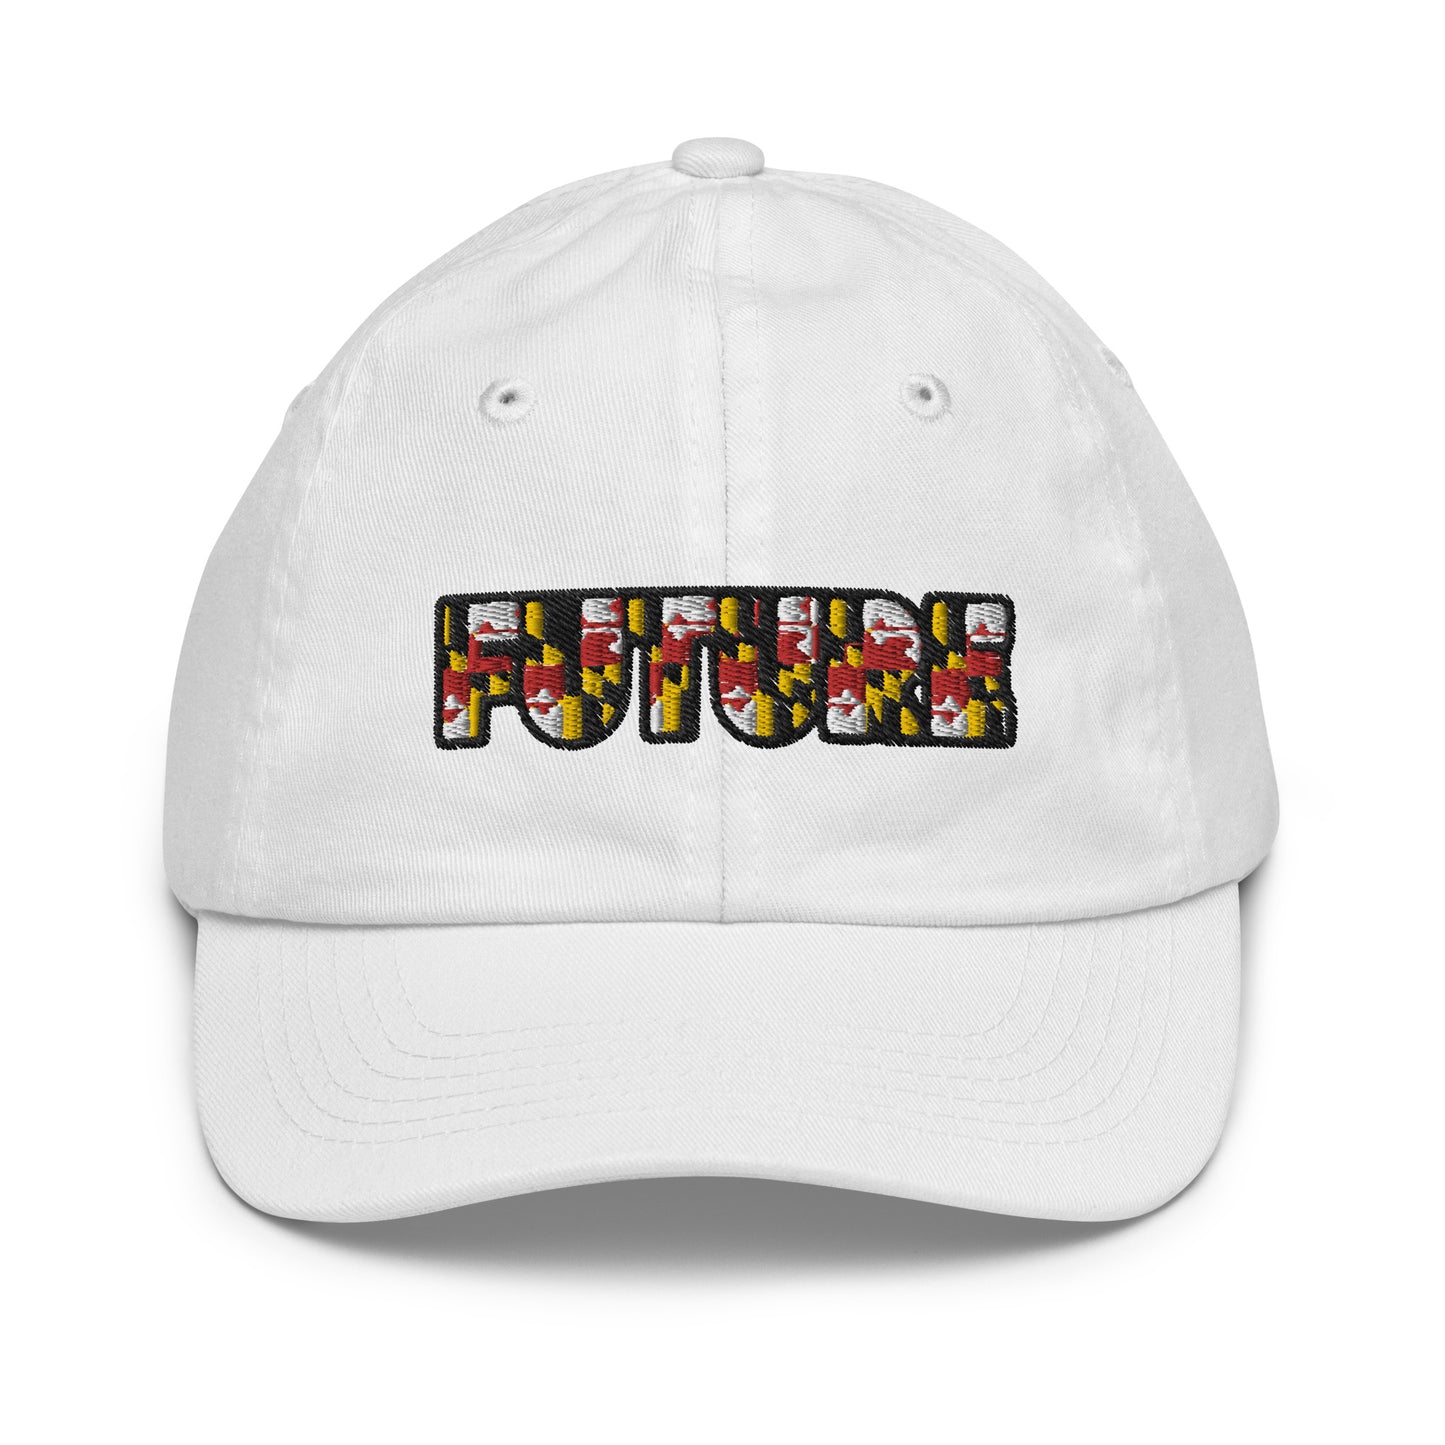 Future Youth Embroidered baseball cap